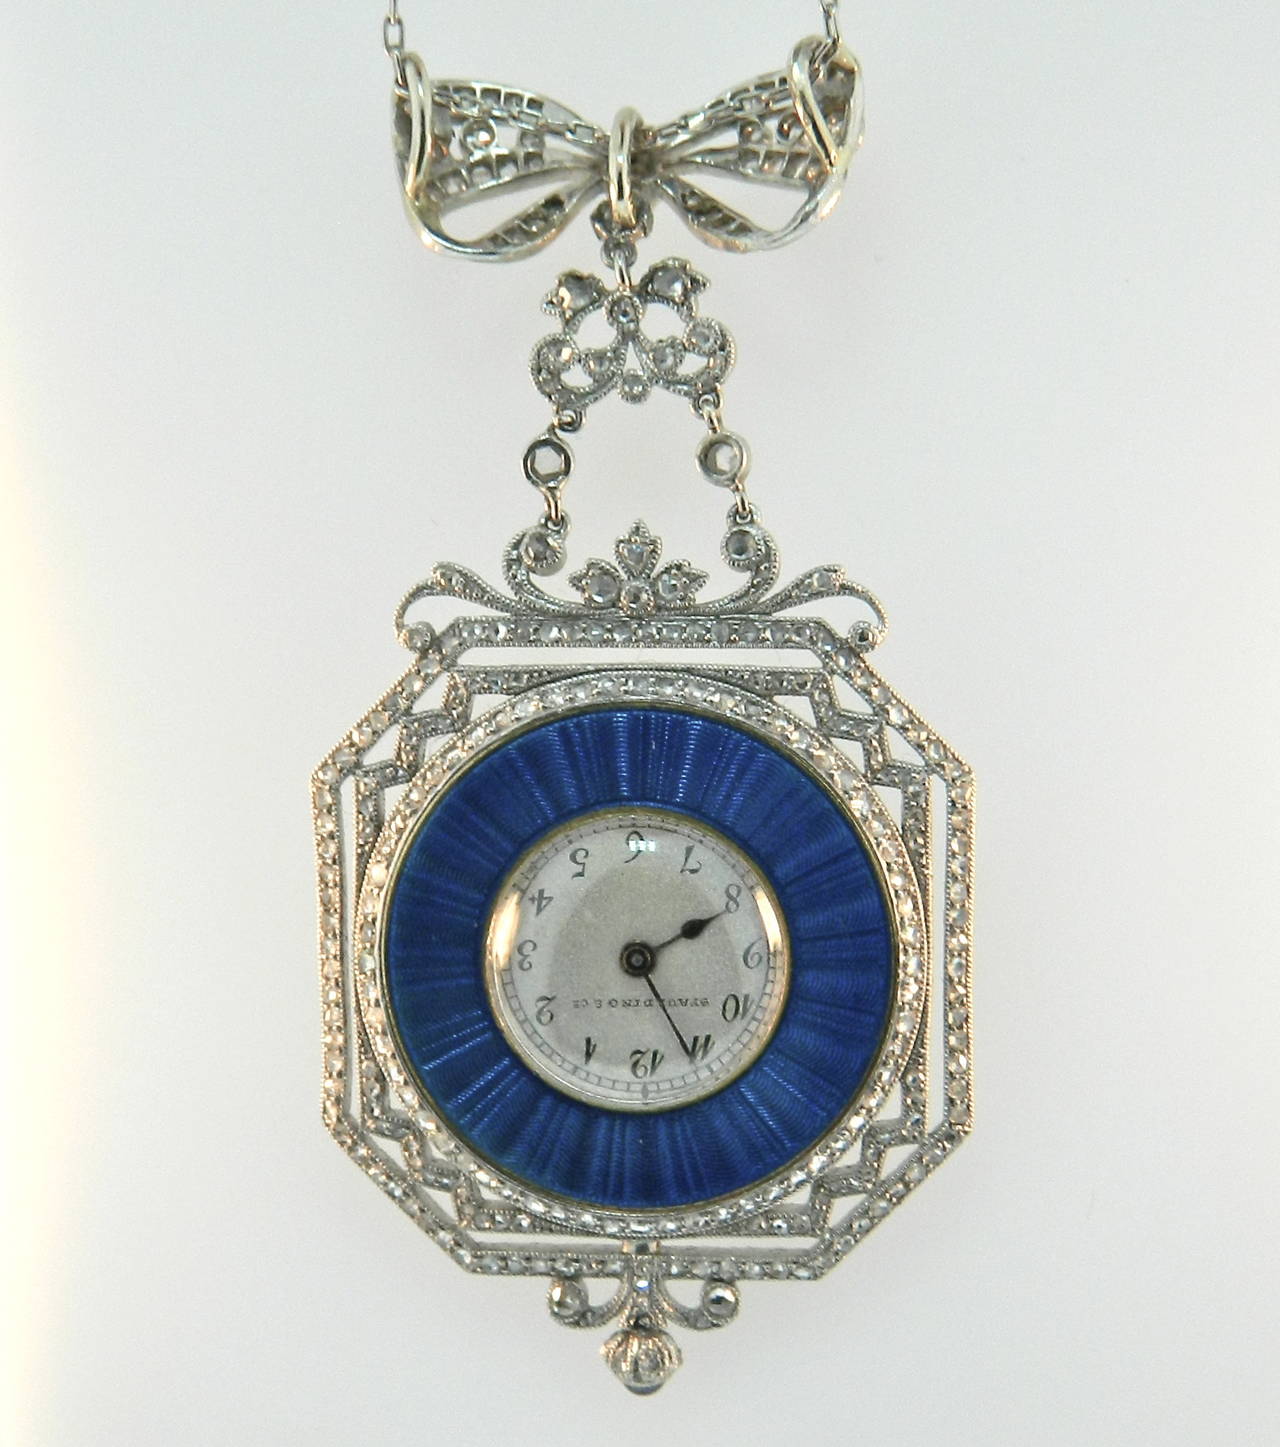 A stunning and unique Edwardian, Diamond, Enamel and Platinum Pendant Watch by Spaulding & Co Chicago.  Made In France.  Movement possibly by Patek Philippe.